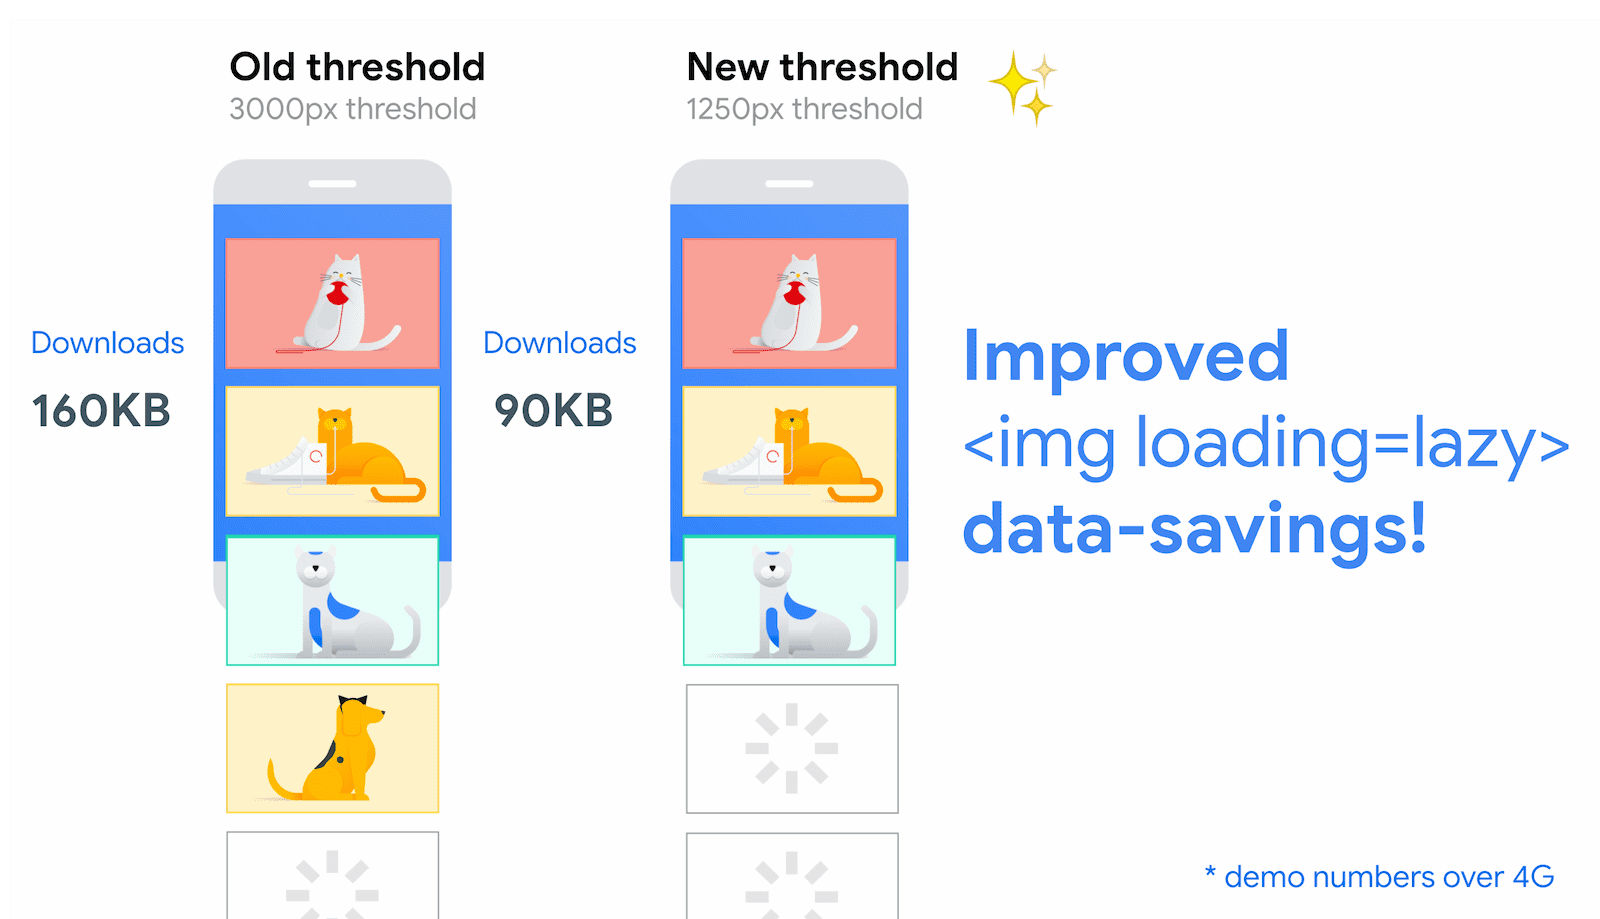 The new and improved thresholds for image lazy loading, reducing the distance-from-viewport thresholds for fast connections from 3000px down to 1250px.